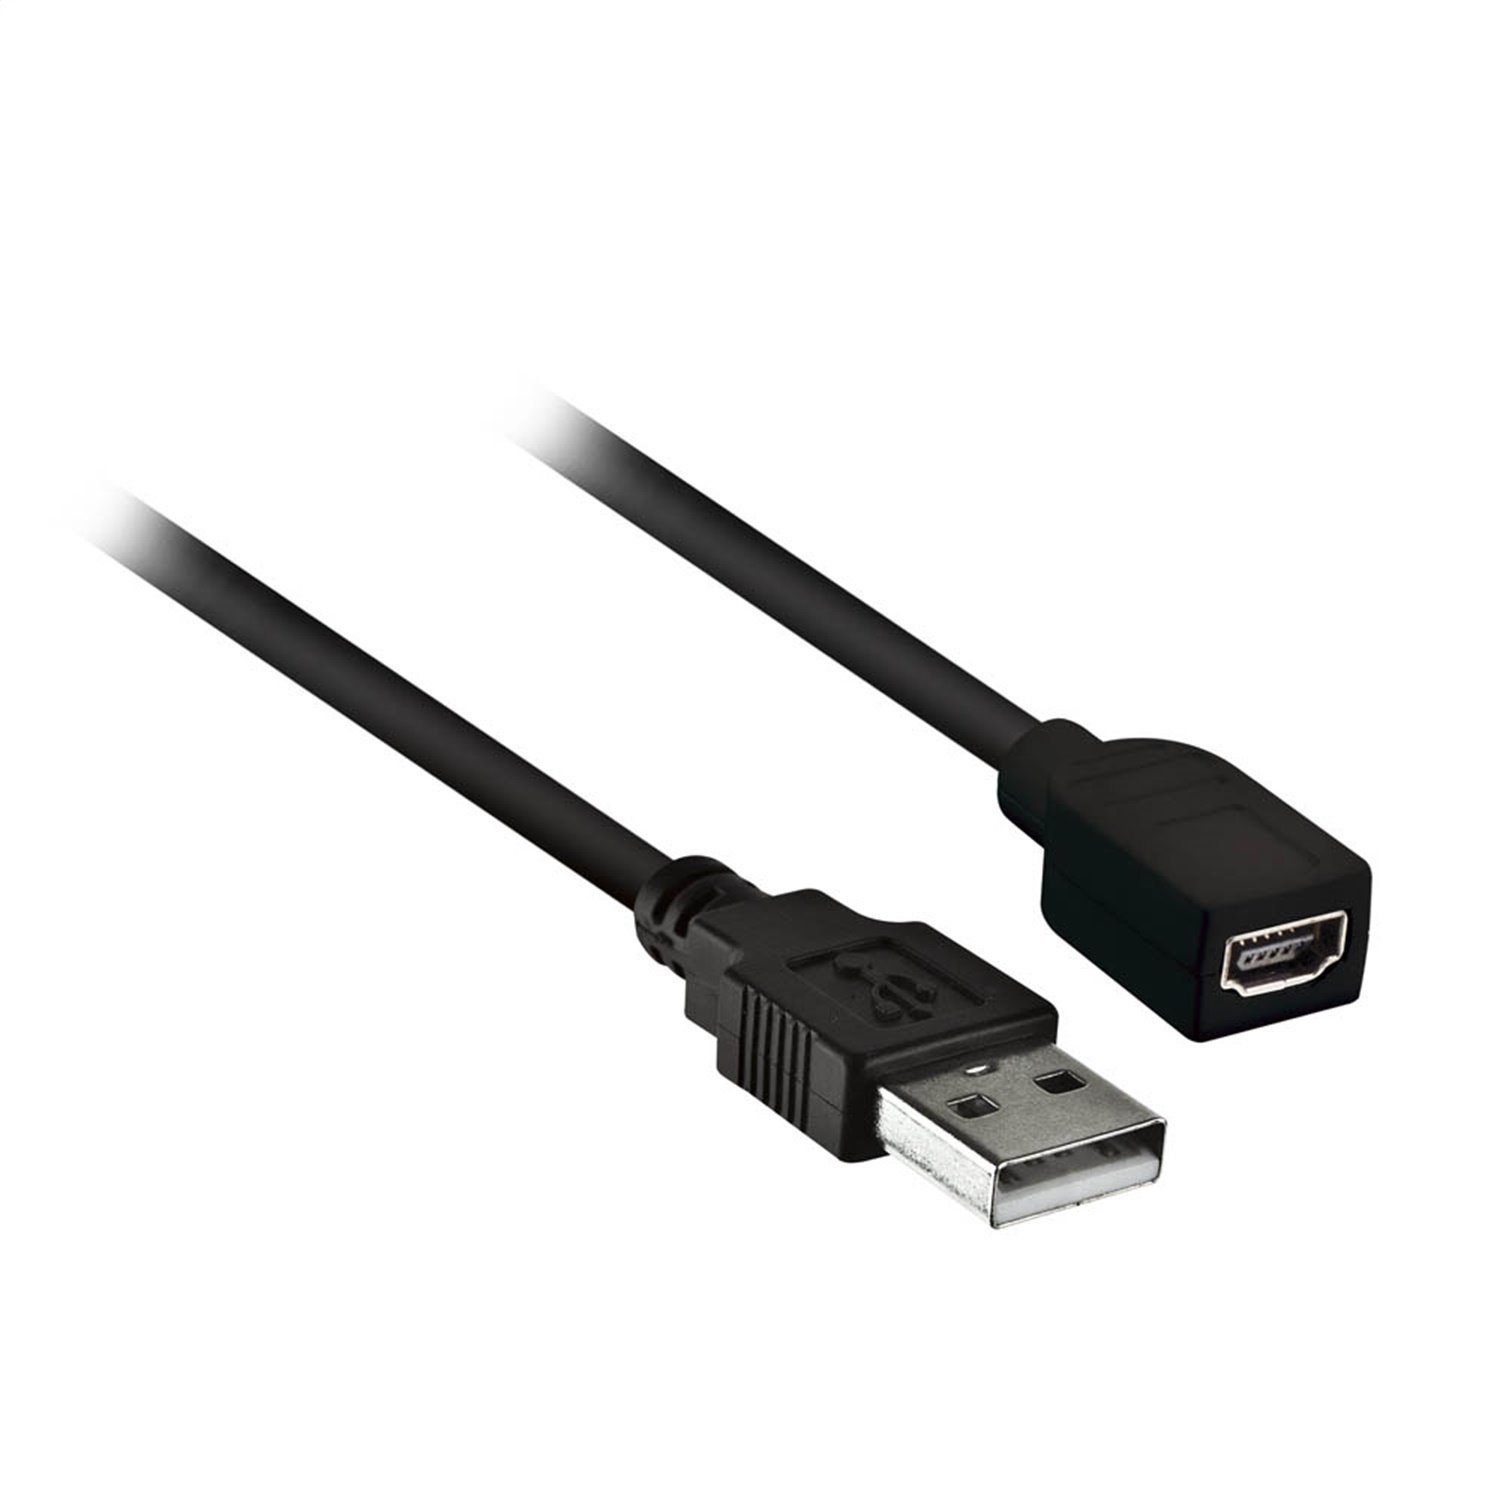 AXUSBM-A USB To Mini A Adaptor Cable